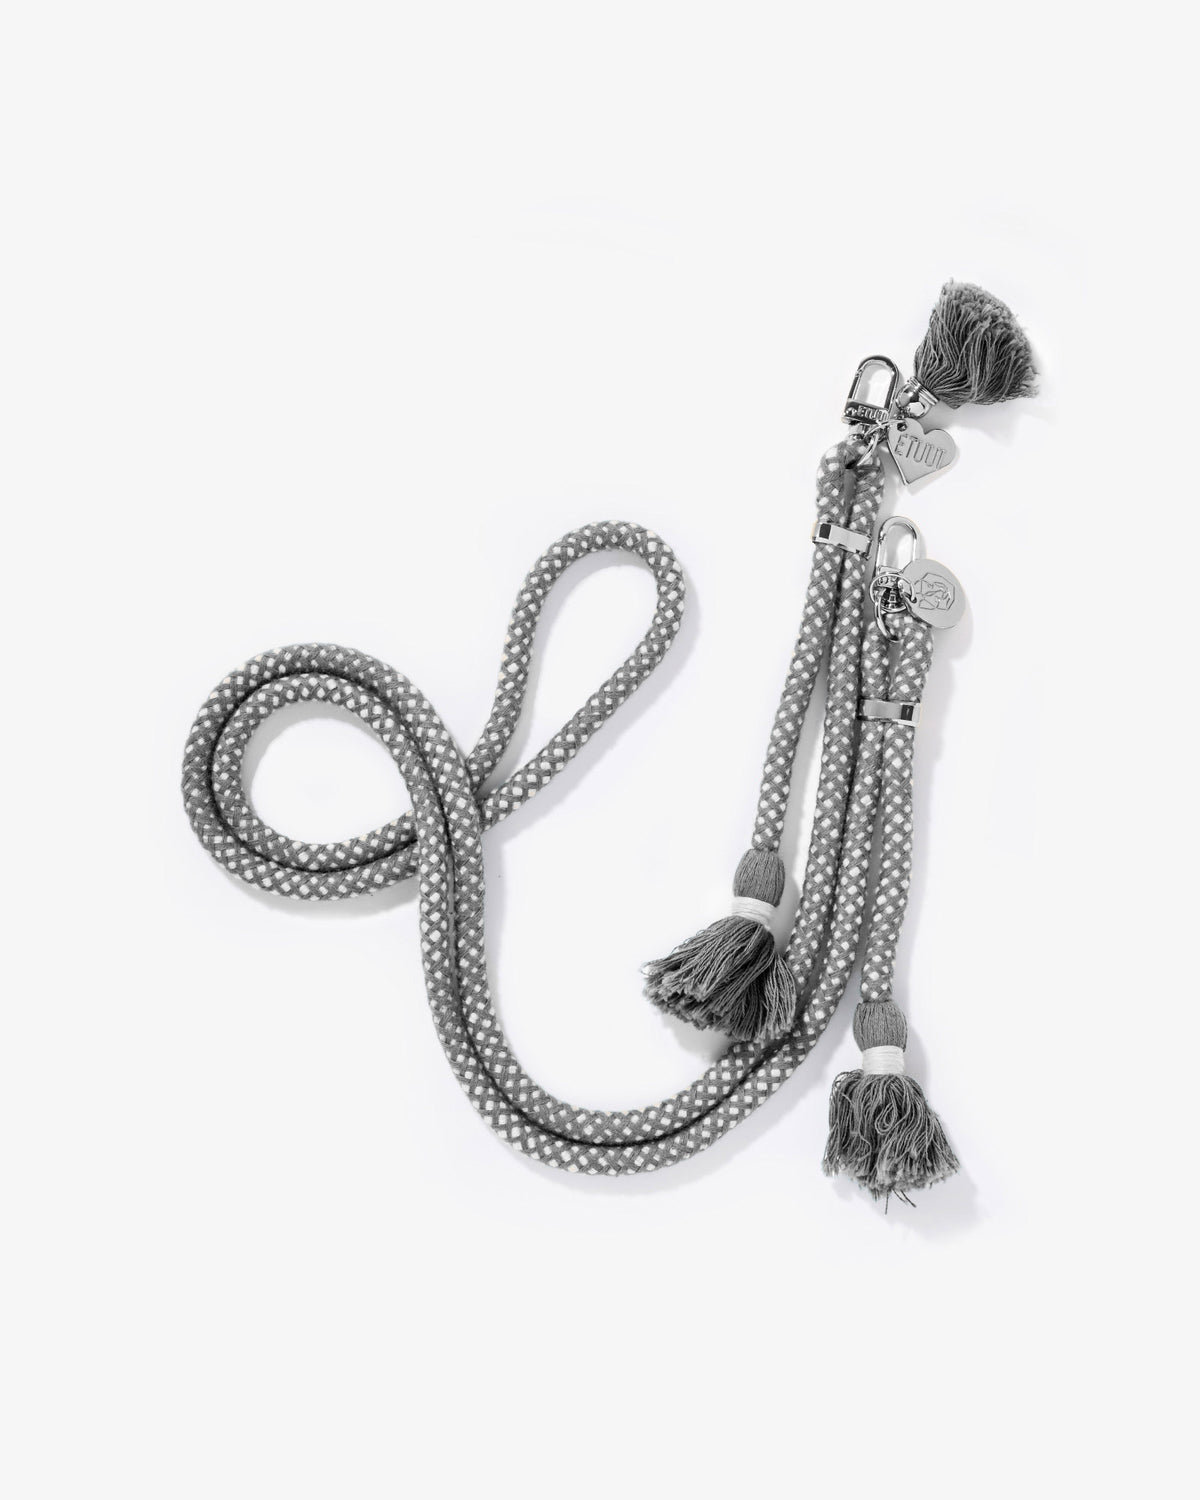 Original cell phone chains - silver